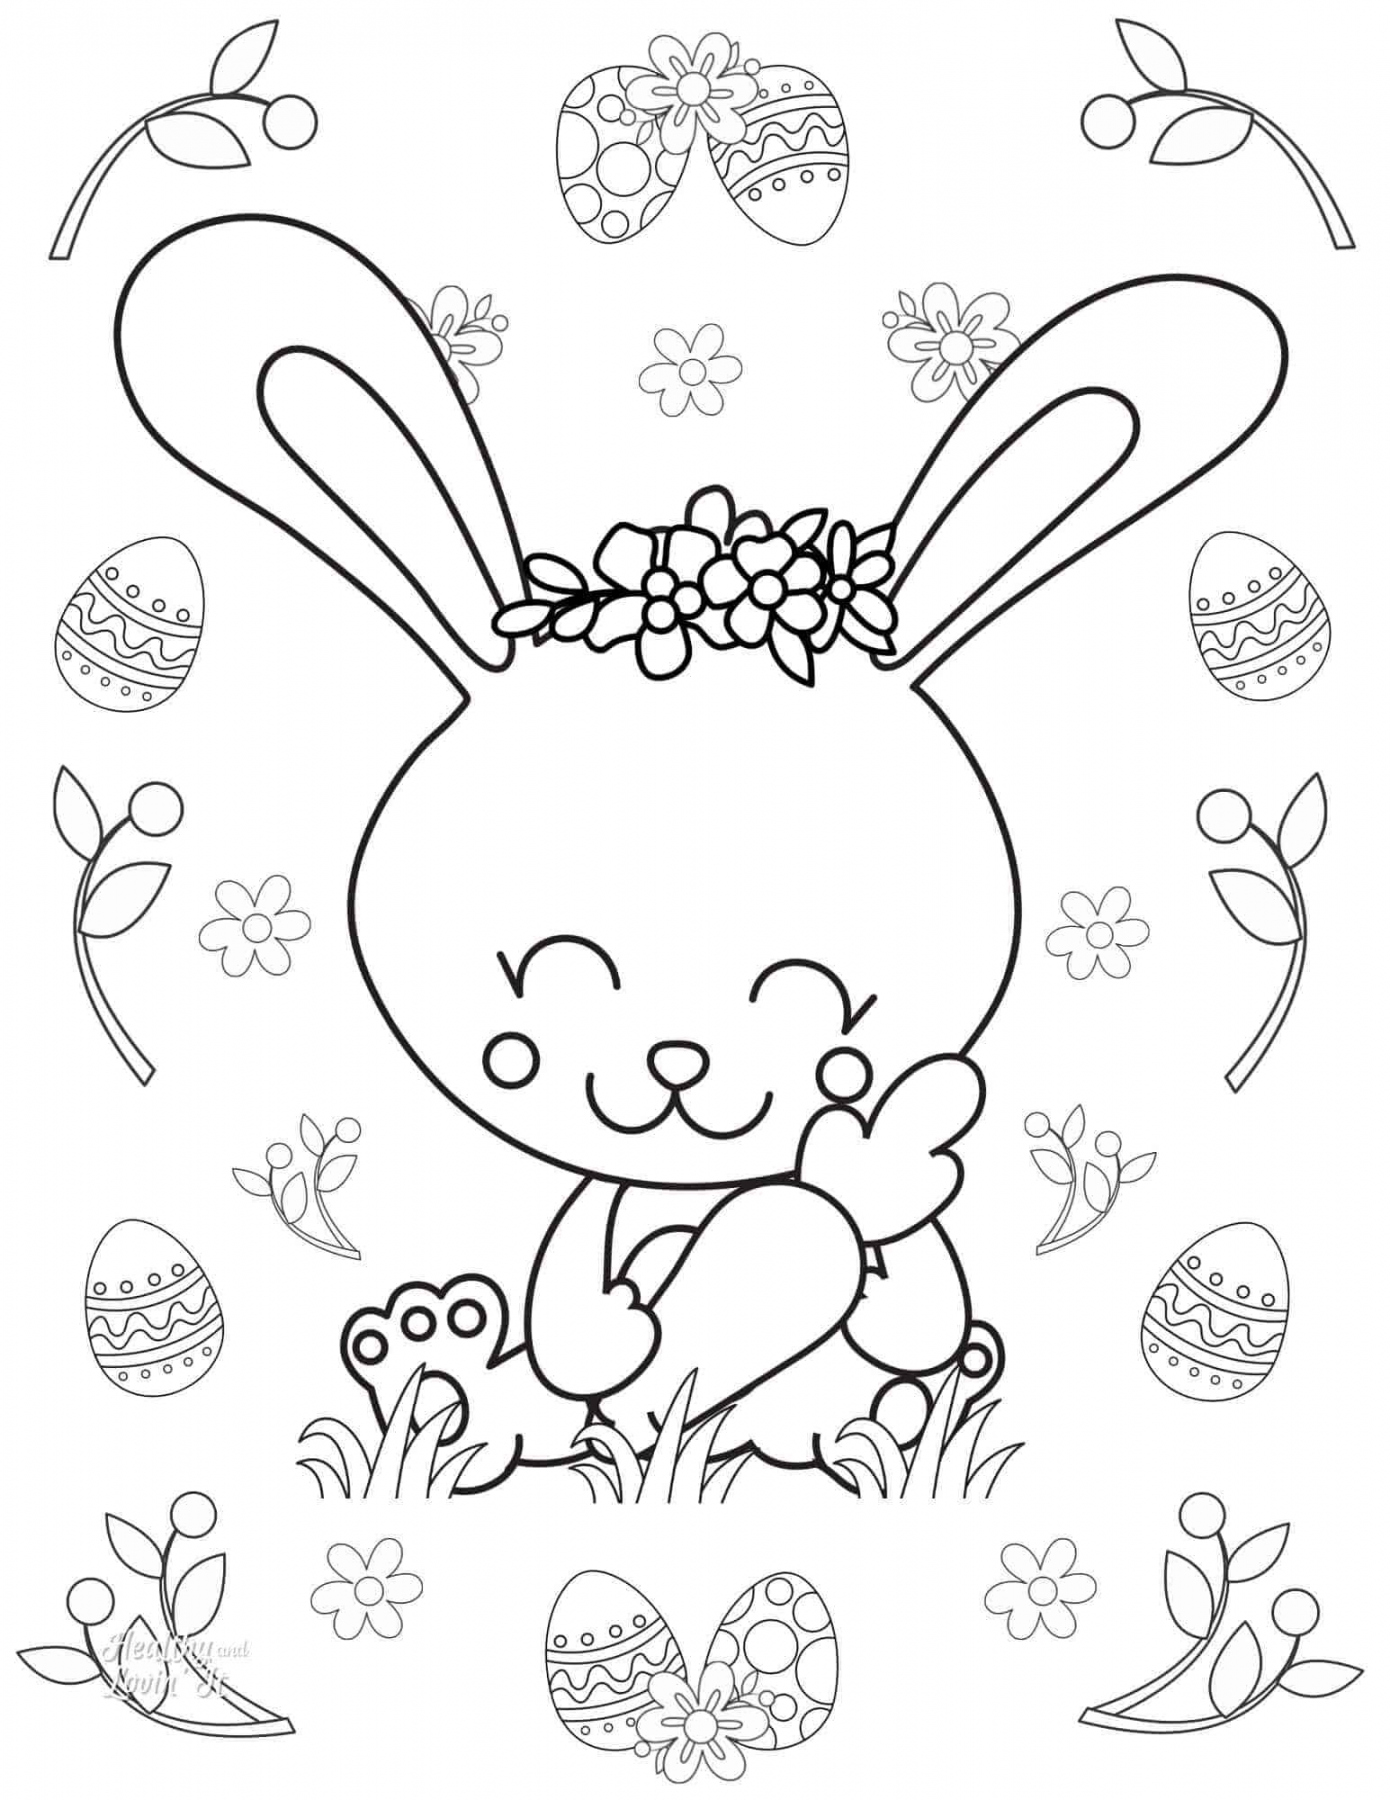 Free Printable Coloring Pages For Easter - Printable - Cute Easter Coloring Pages - Free Printables!